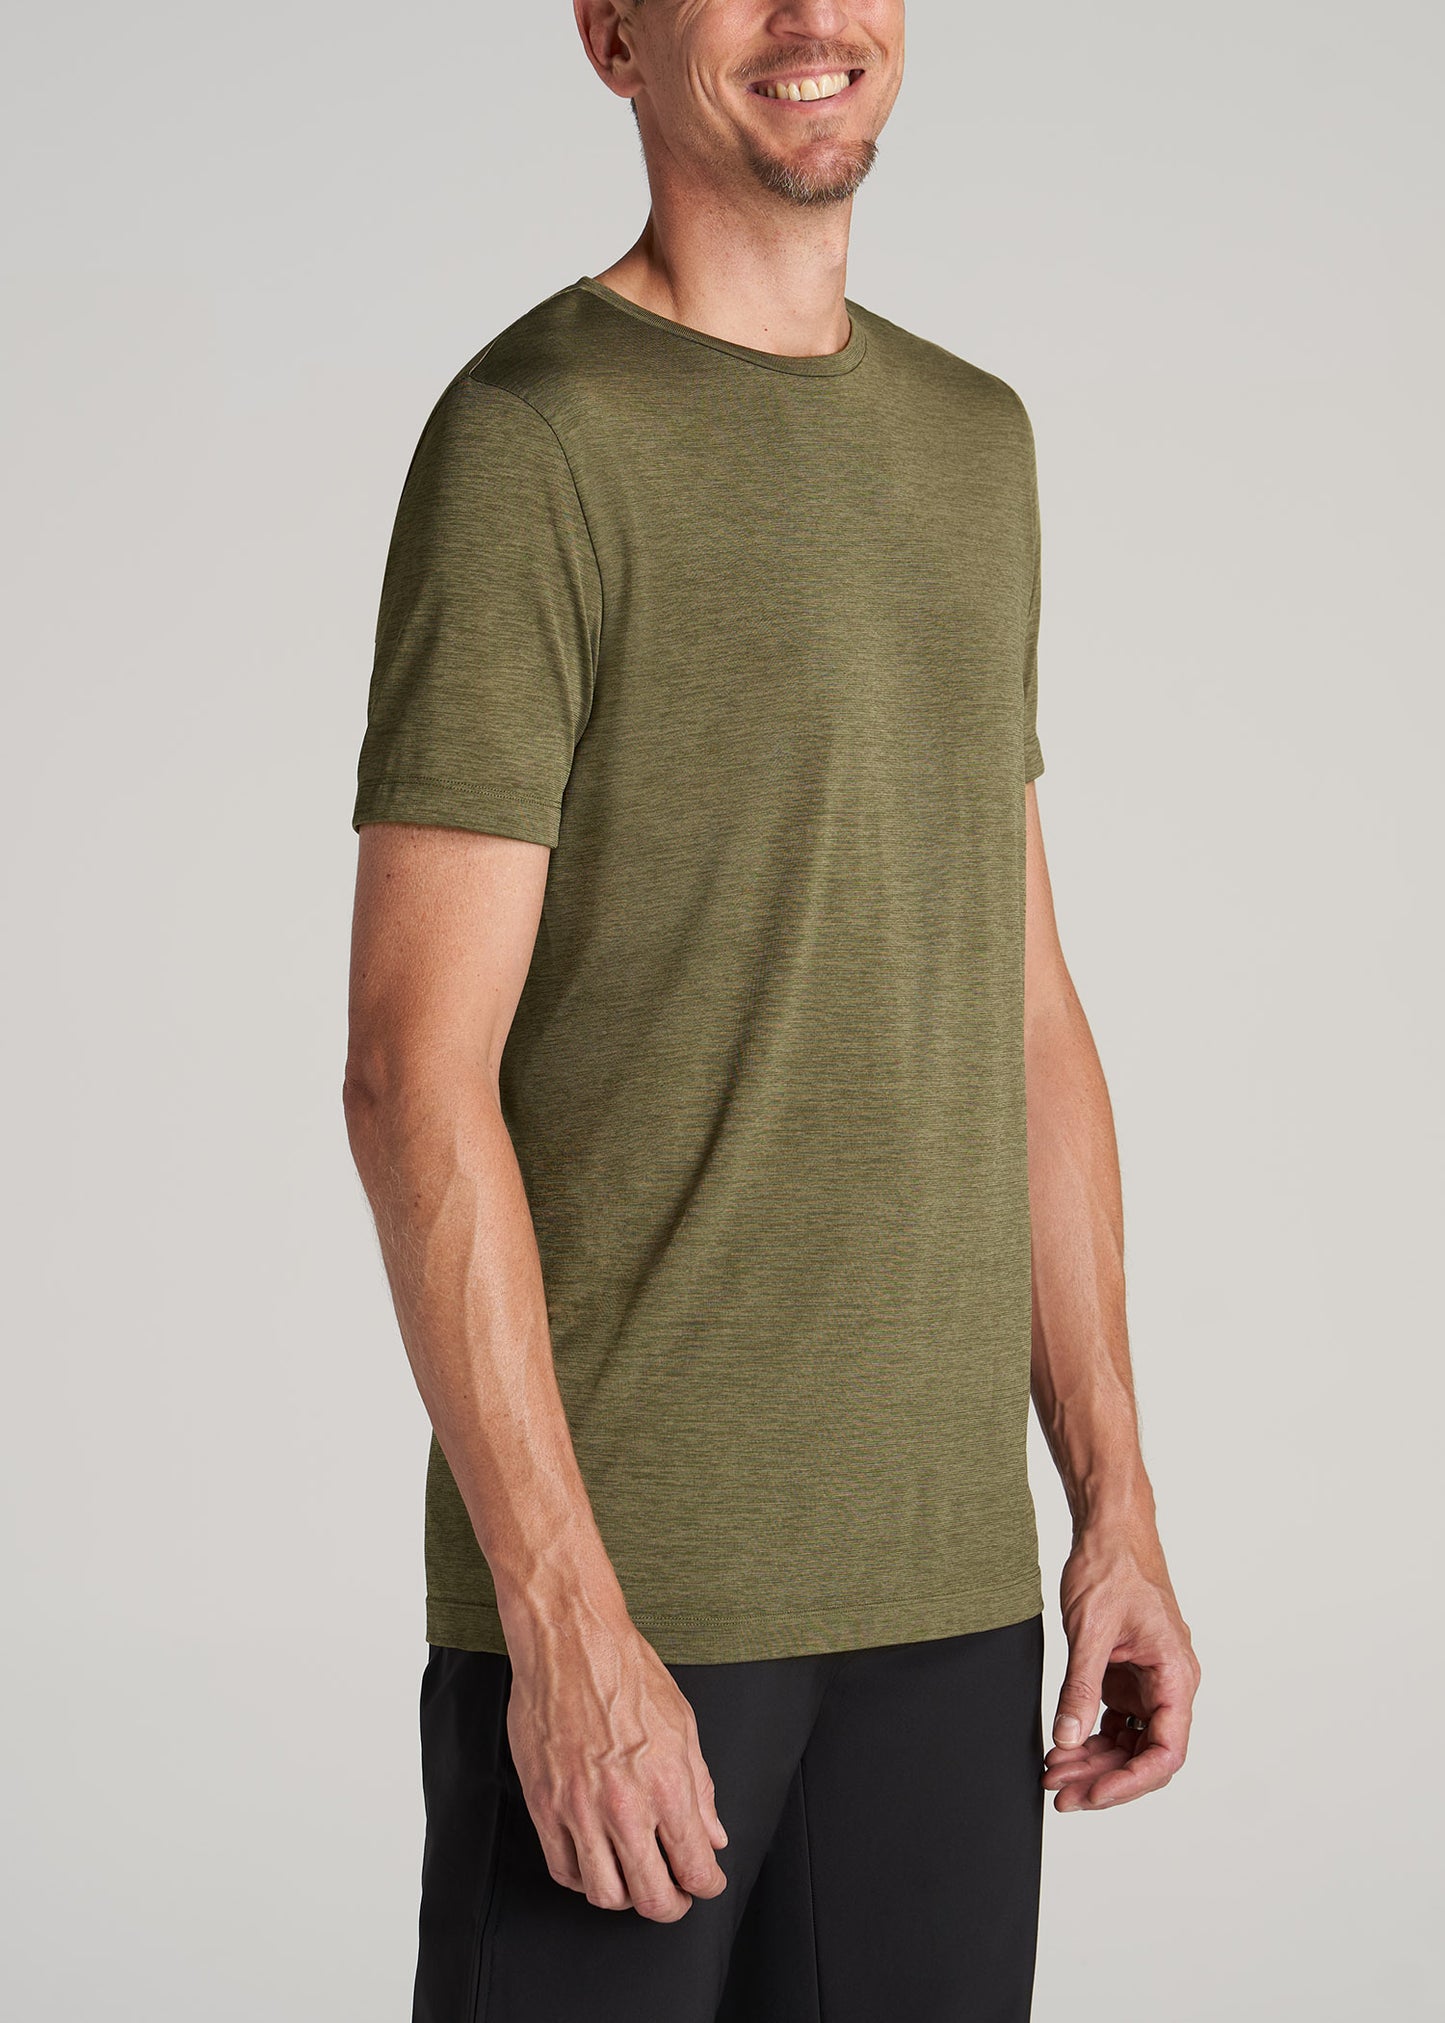     American-Tall-Men-AT-Performance-Short-Sleeve-Jersey-Athletic-Tee-Olive-Mix-side